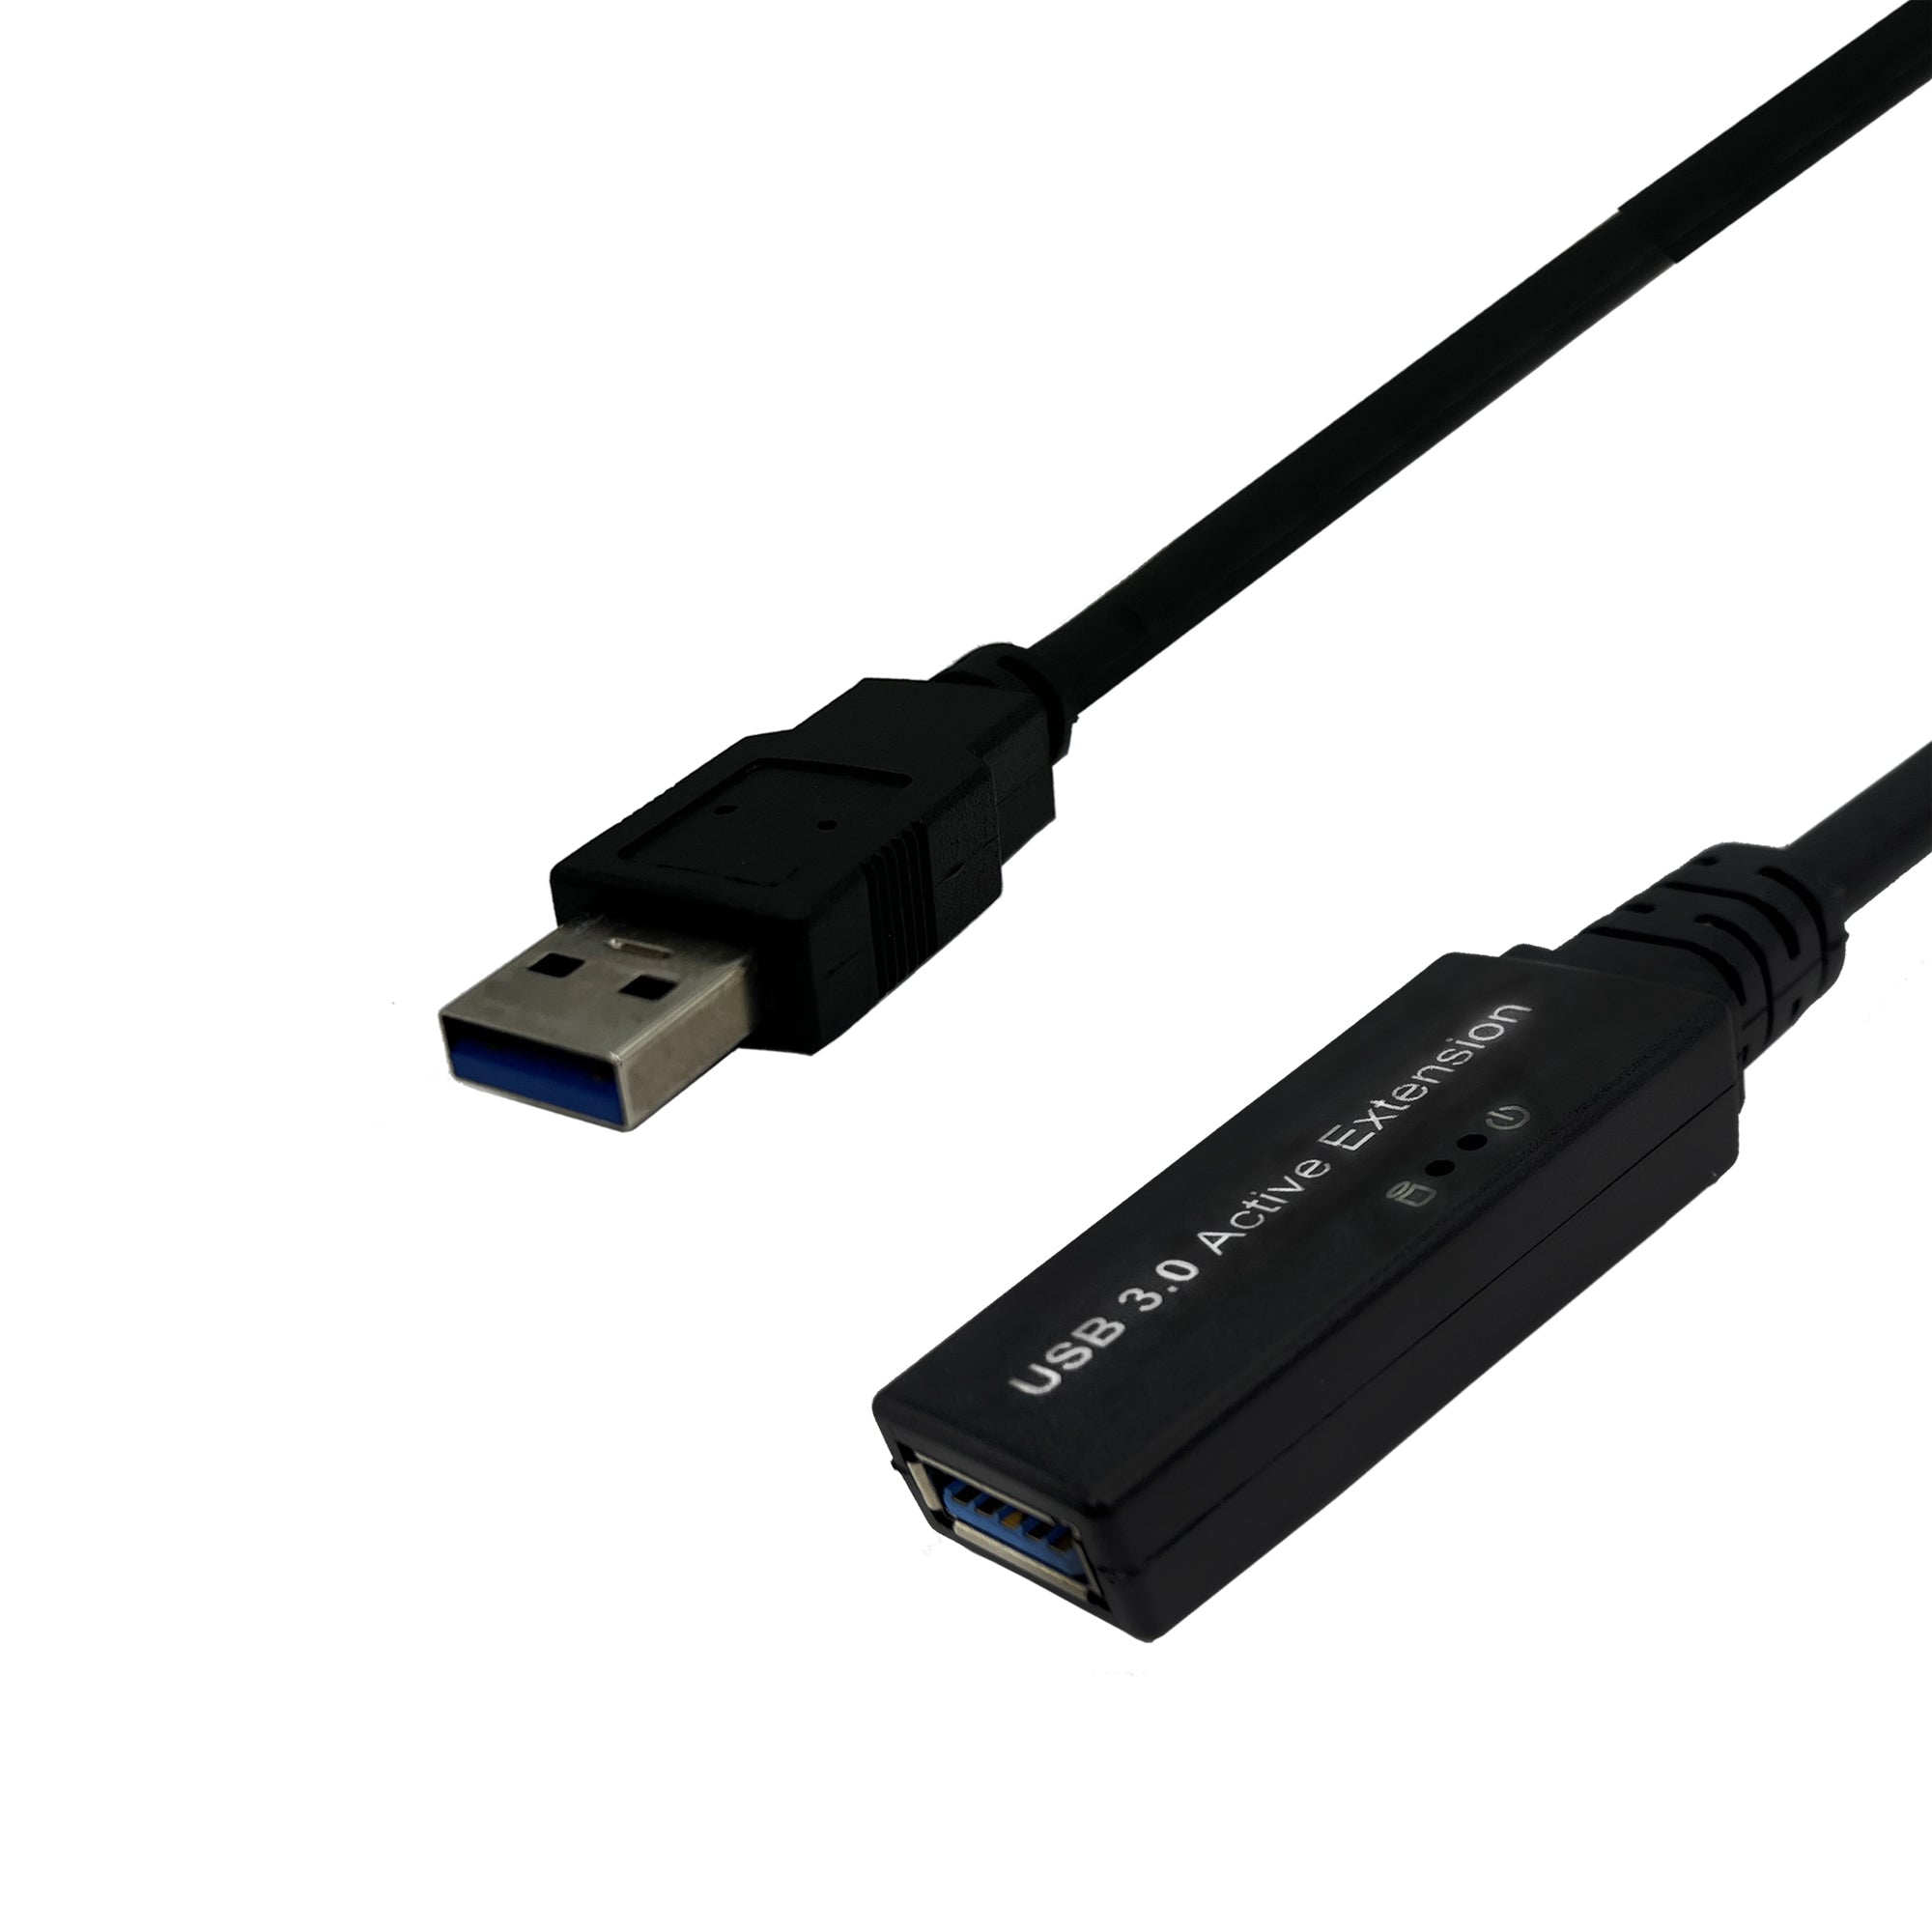 5m USB 3 Active Extension Cable A Male to A Female - High Speed